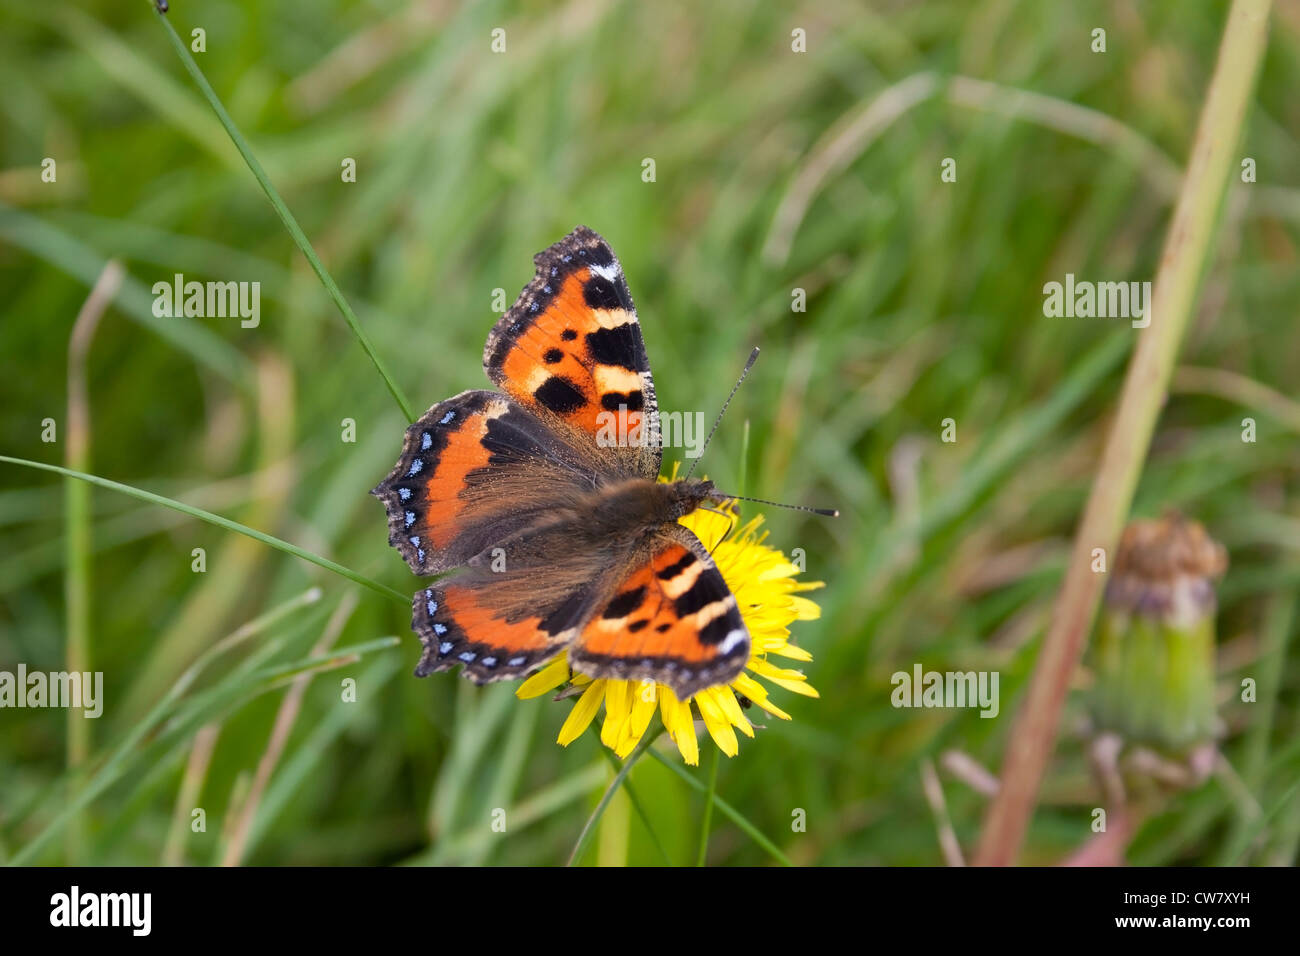 A small tortoiseshell butterfly photographed in the UK. Stock Photo